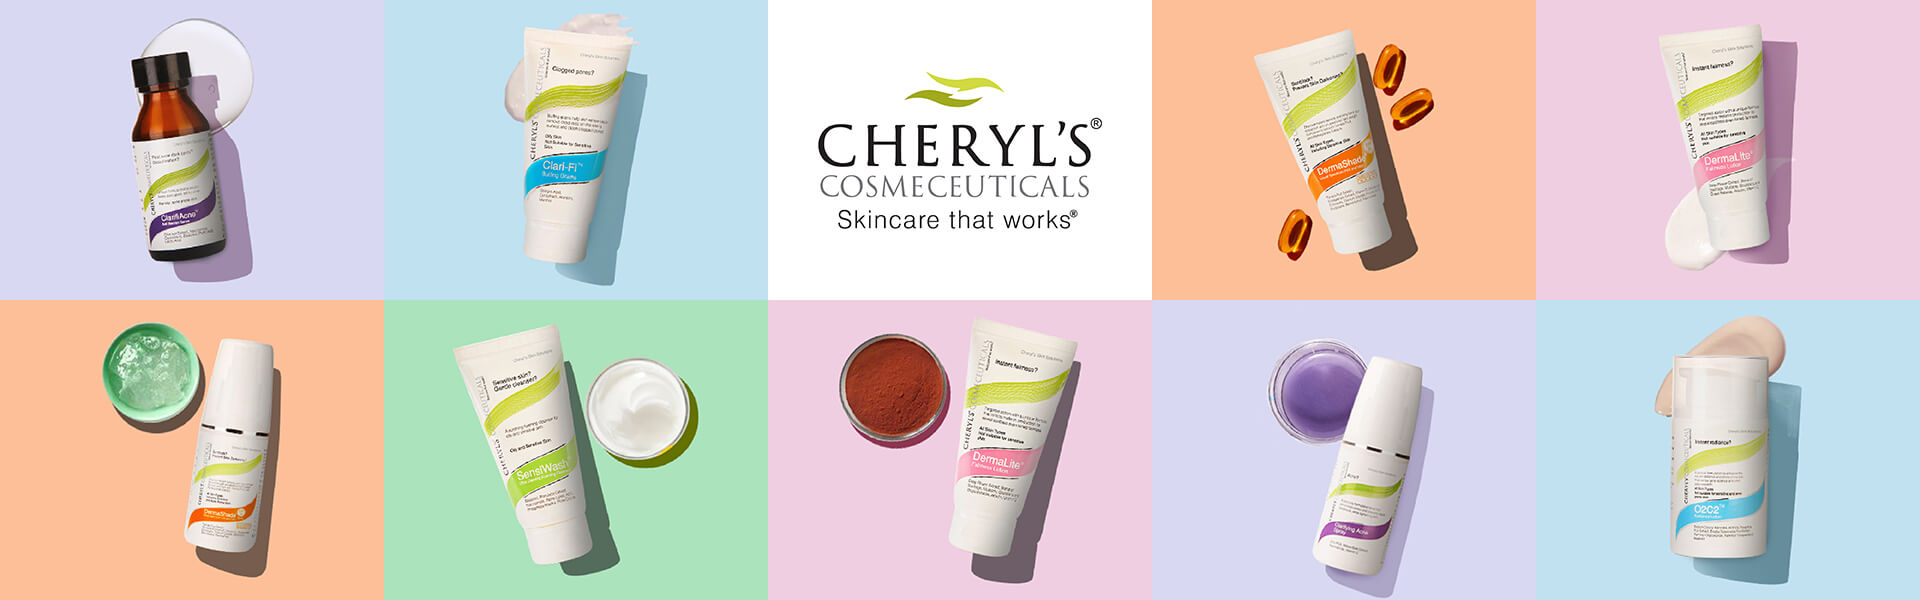 Buy Cheryl’s Cosmeceuticals Skincare Products - Home Delivery